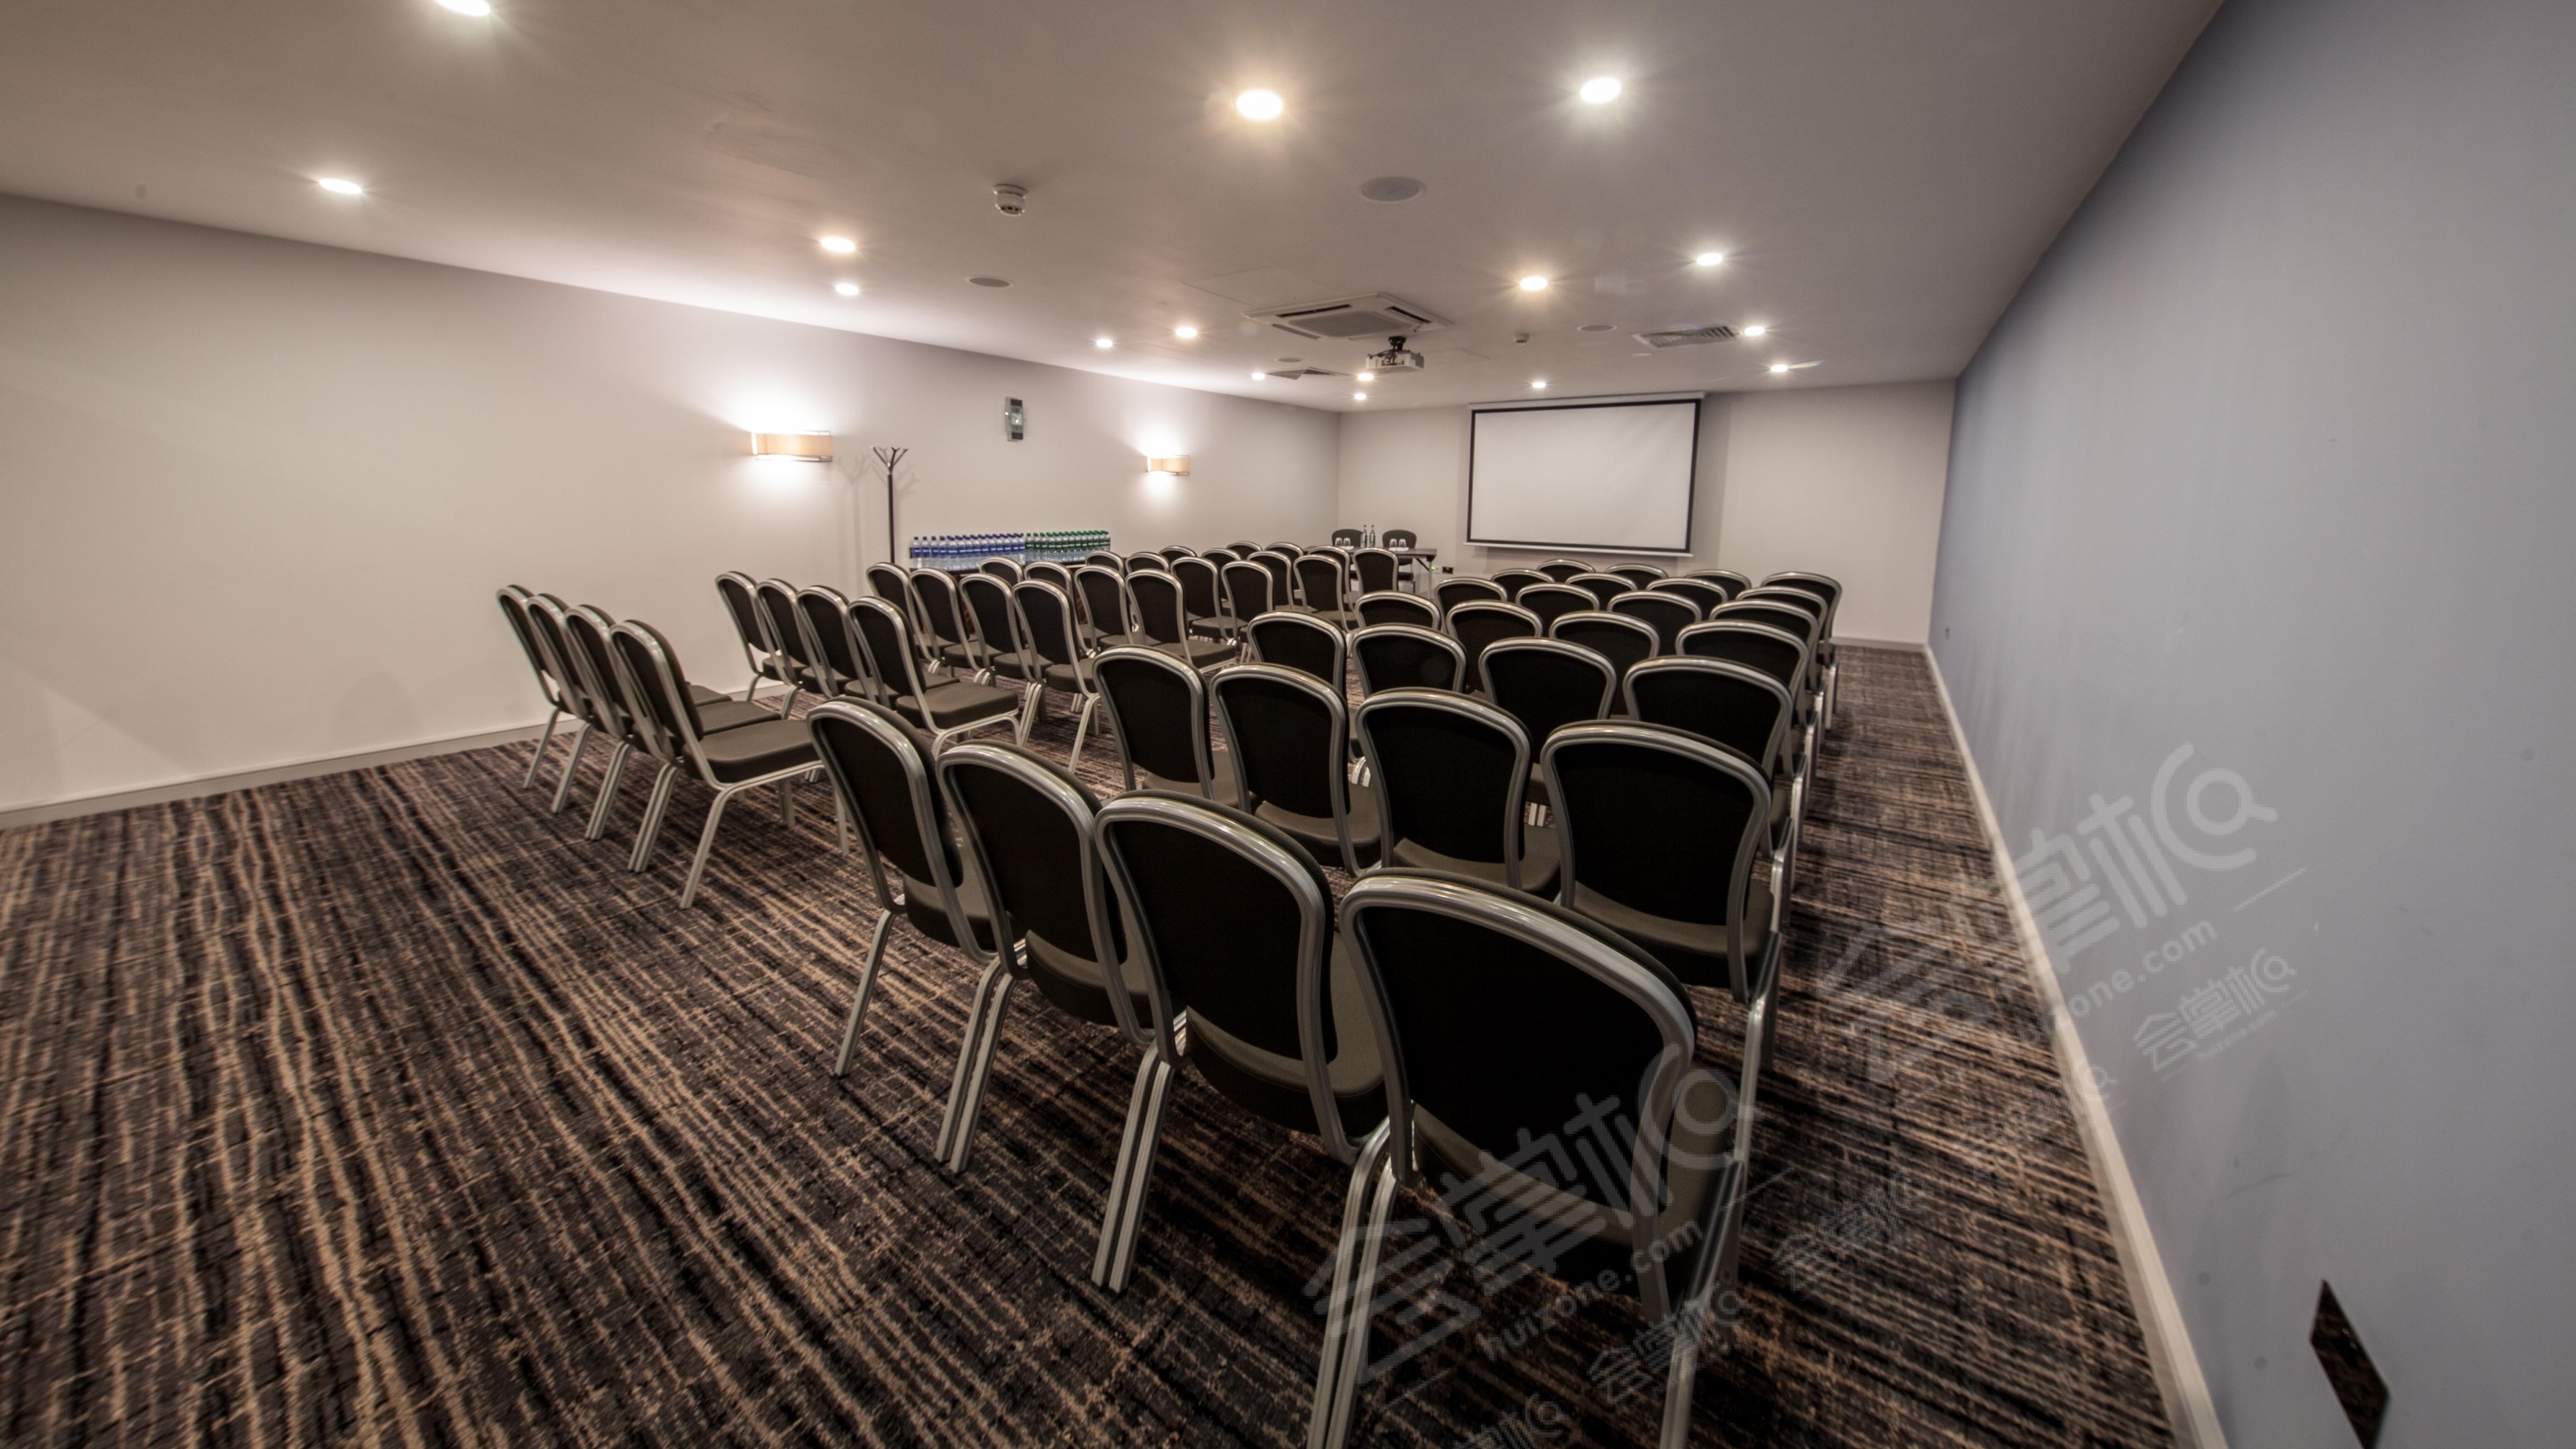 The Birmingham Conference and Events Centre at the Holiday Inn Birmingham City Centre21